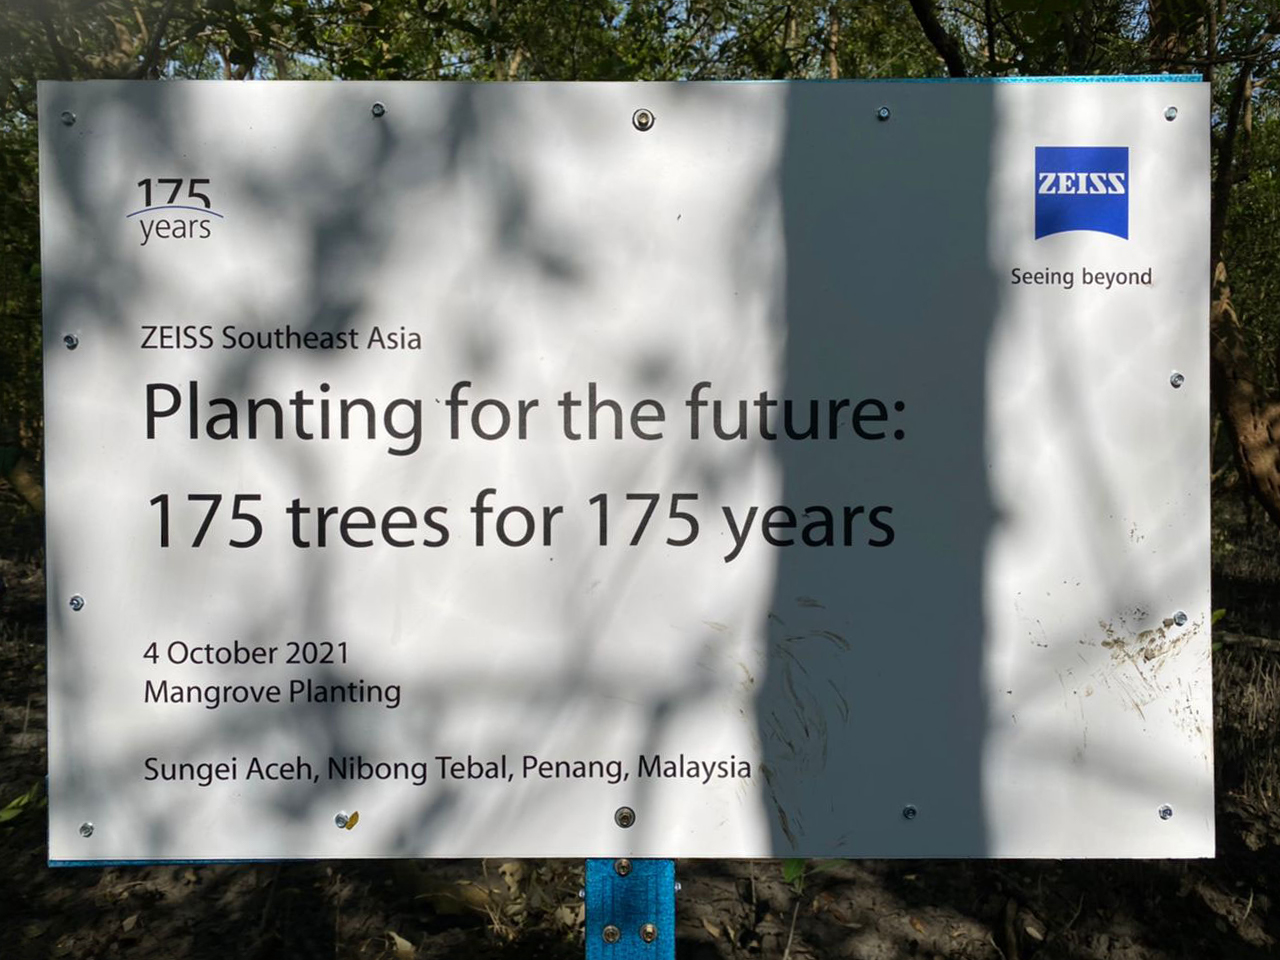 A sign in the field reading ZEISS Southeast Asia - Planting for the future: 175 trees for 175 years